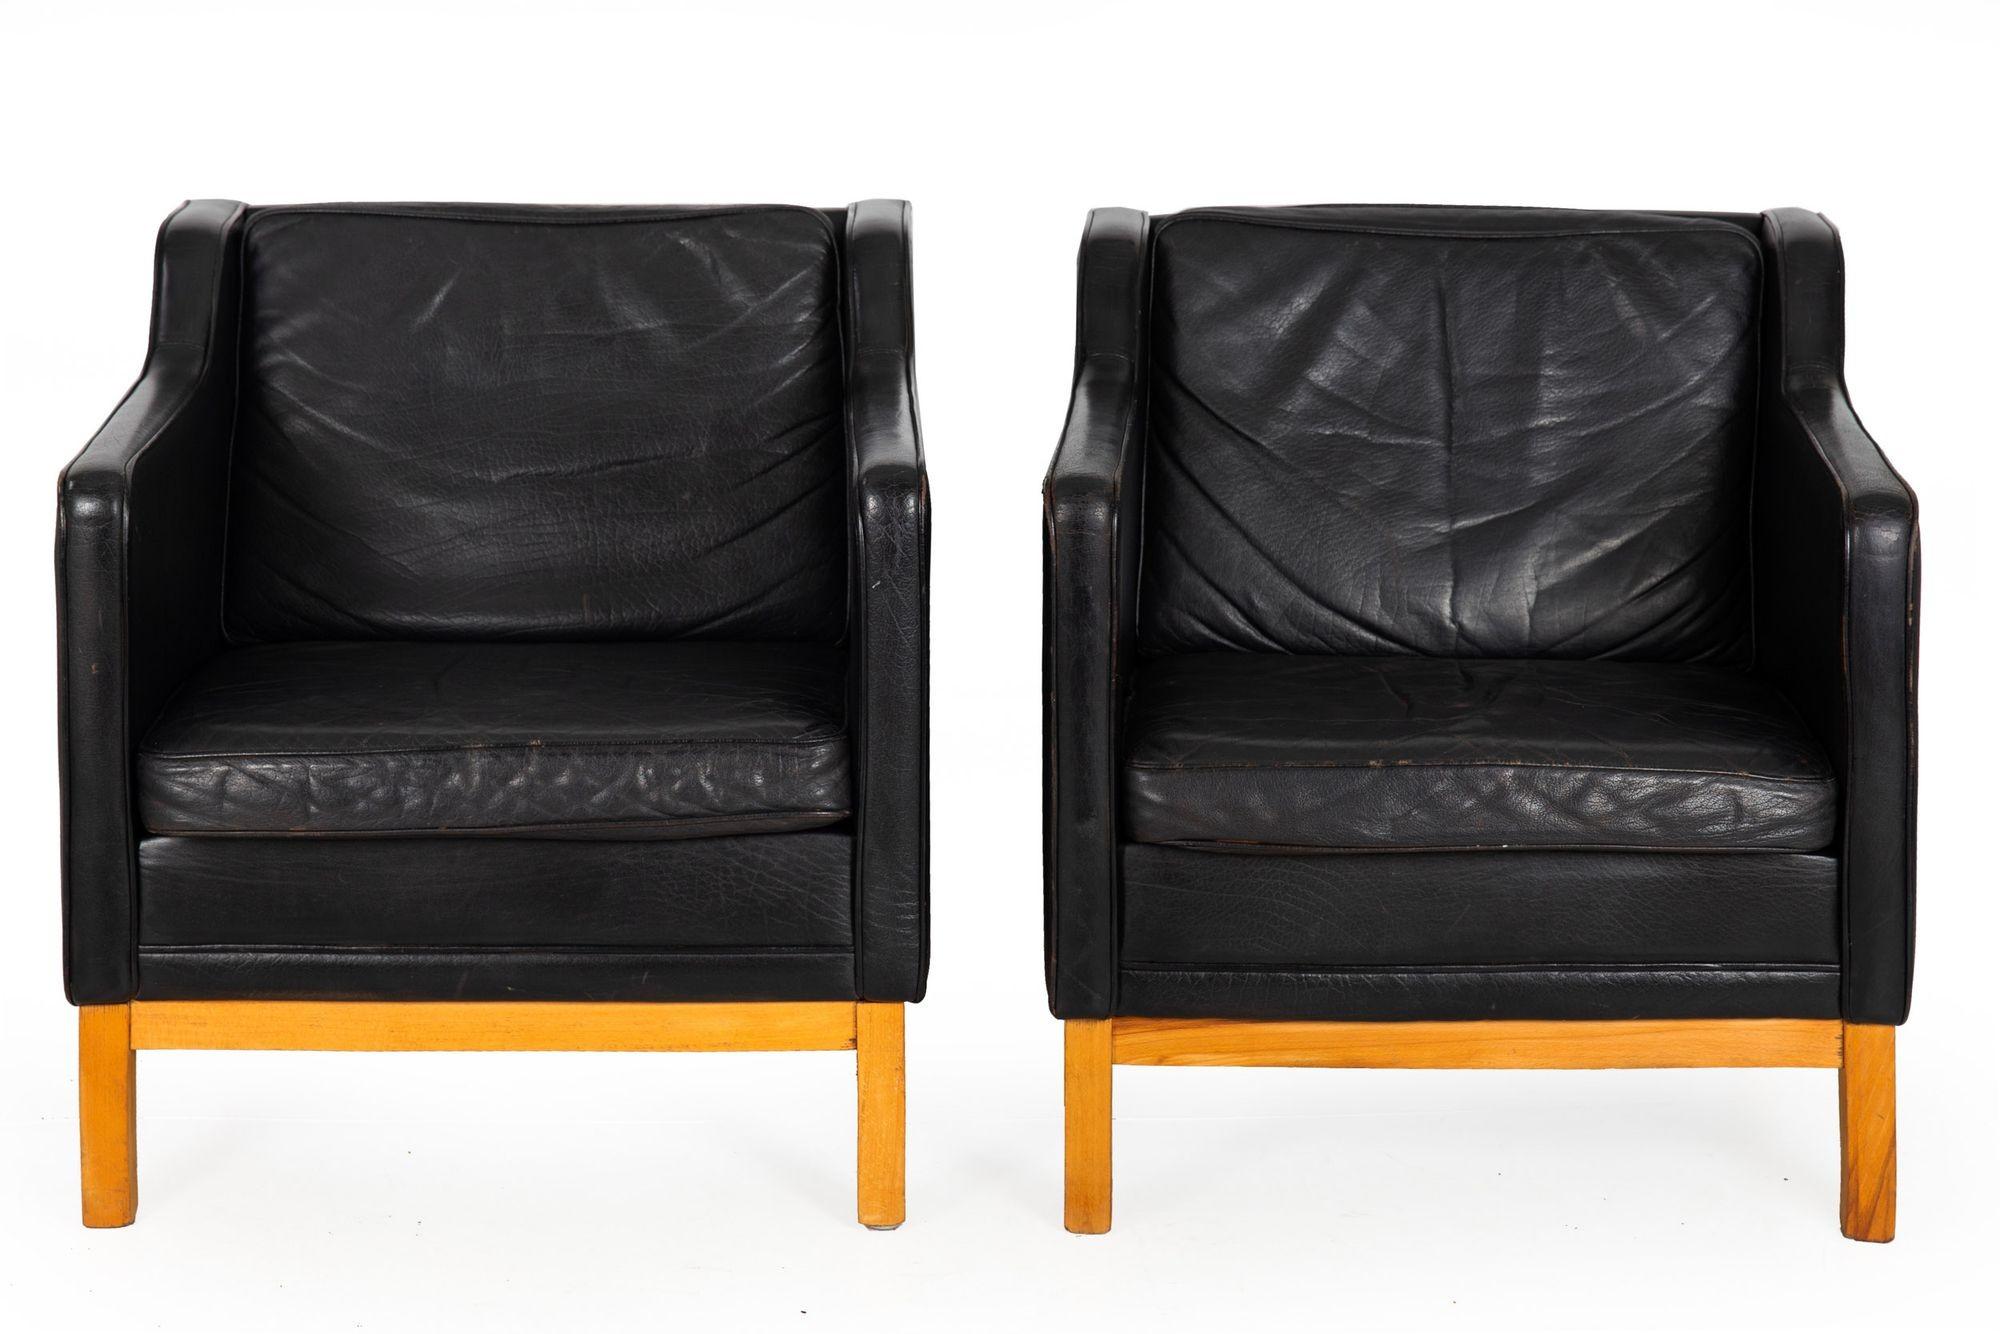 PAIR OF MH195 LOWBACK ARMCHAIRS WITH OTTOMAN BY MOGENS HANSEN
In top-grain black leather with blonde beechwood frames  last quarter of the 20th century
Item # 306LIK27P

This very nicely patinated pair of MH195 lowback armchairs retain their